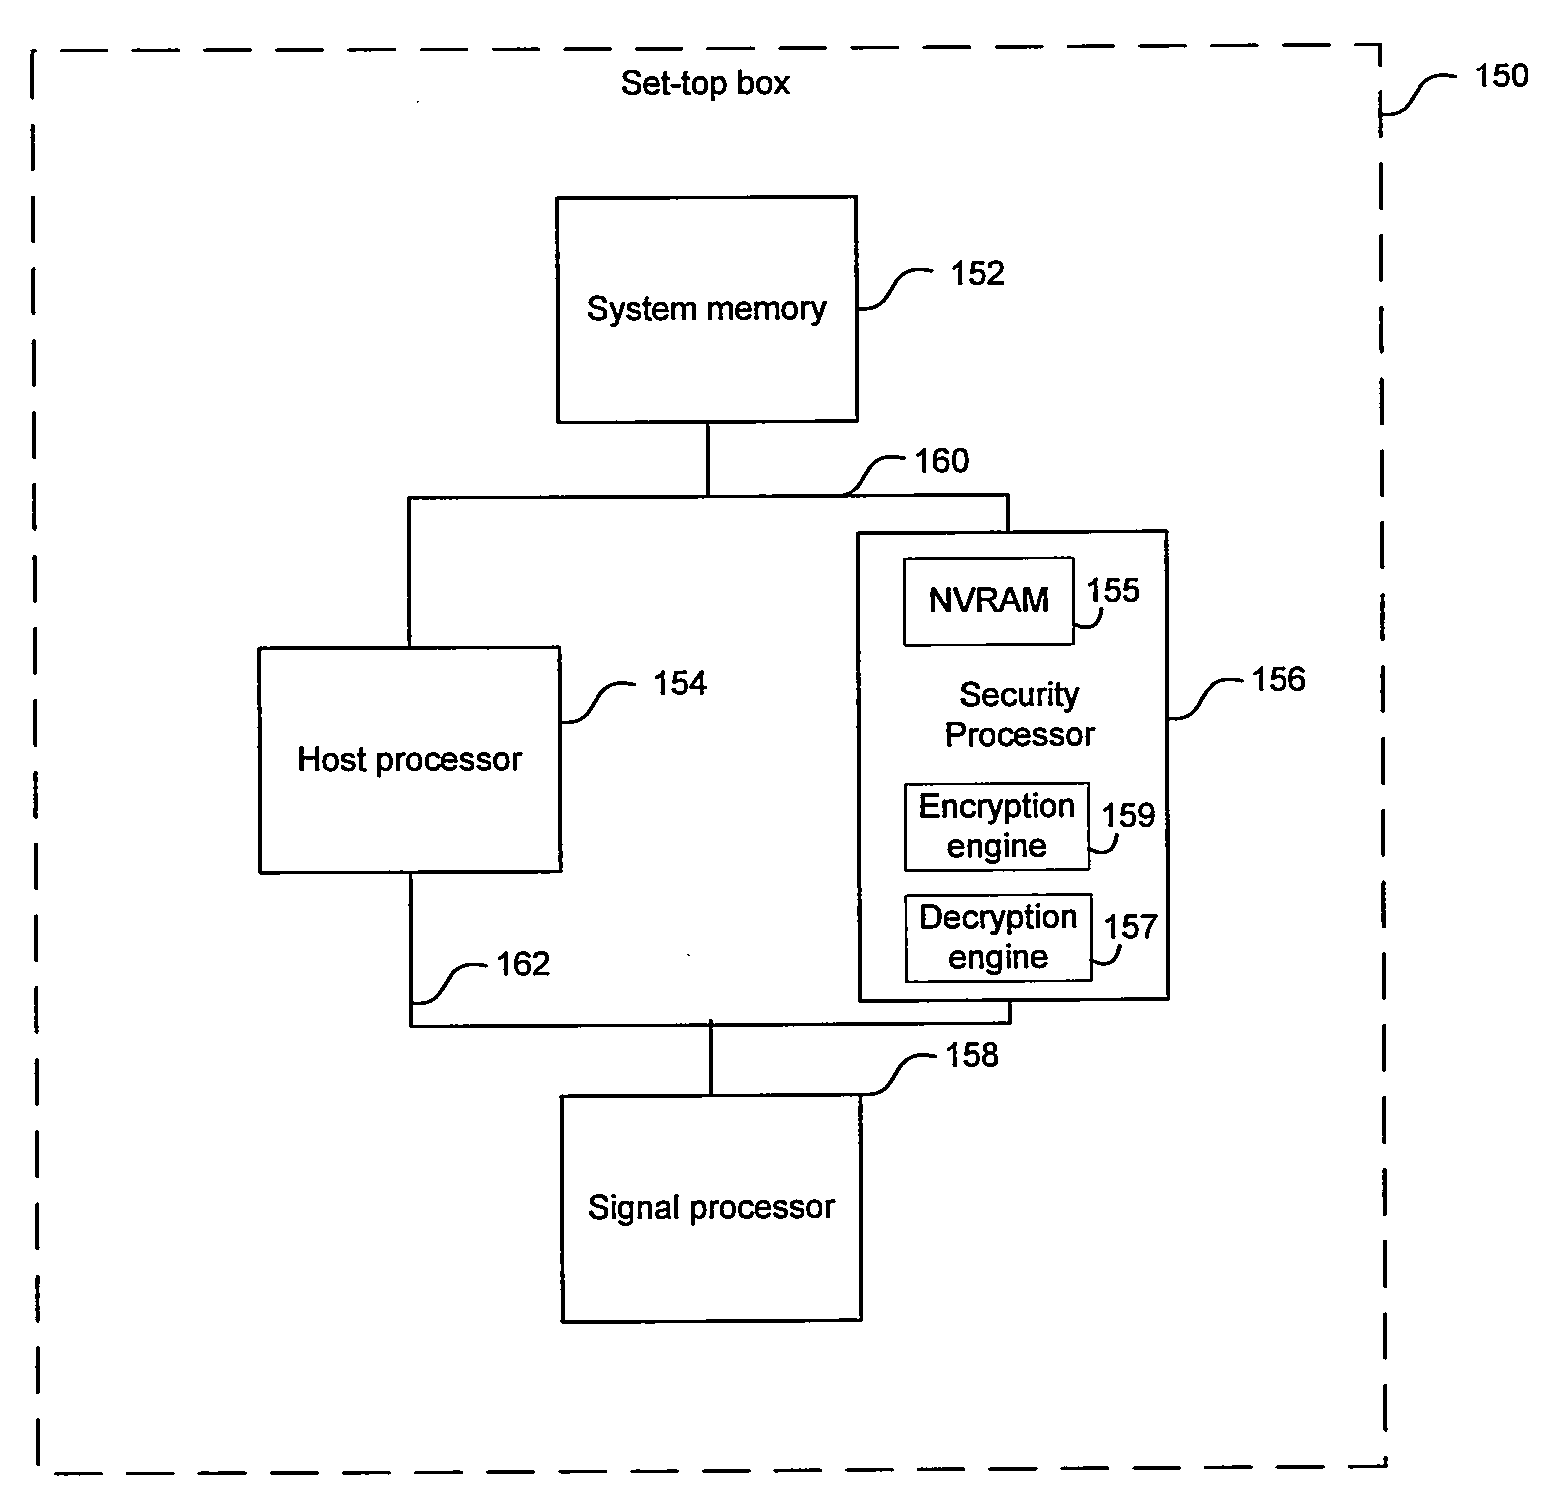 Method and System for Improved Fault Tolerance in Distributed Customization Controls Using Non-Volatile Memory